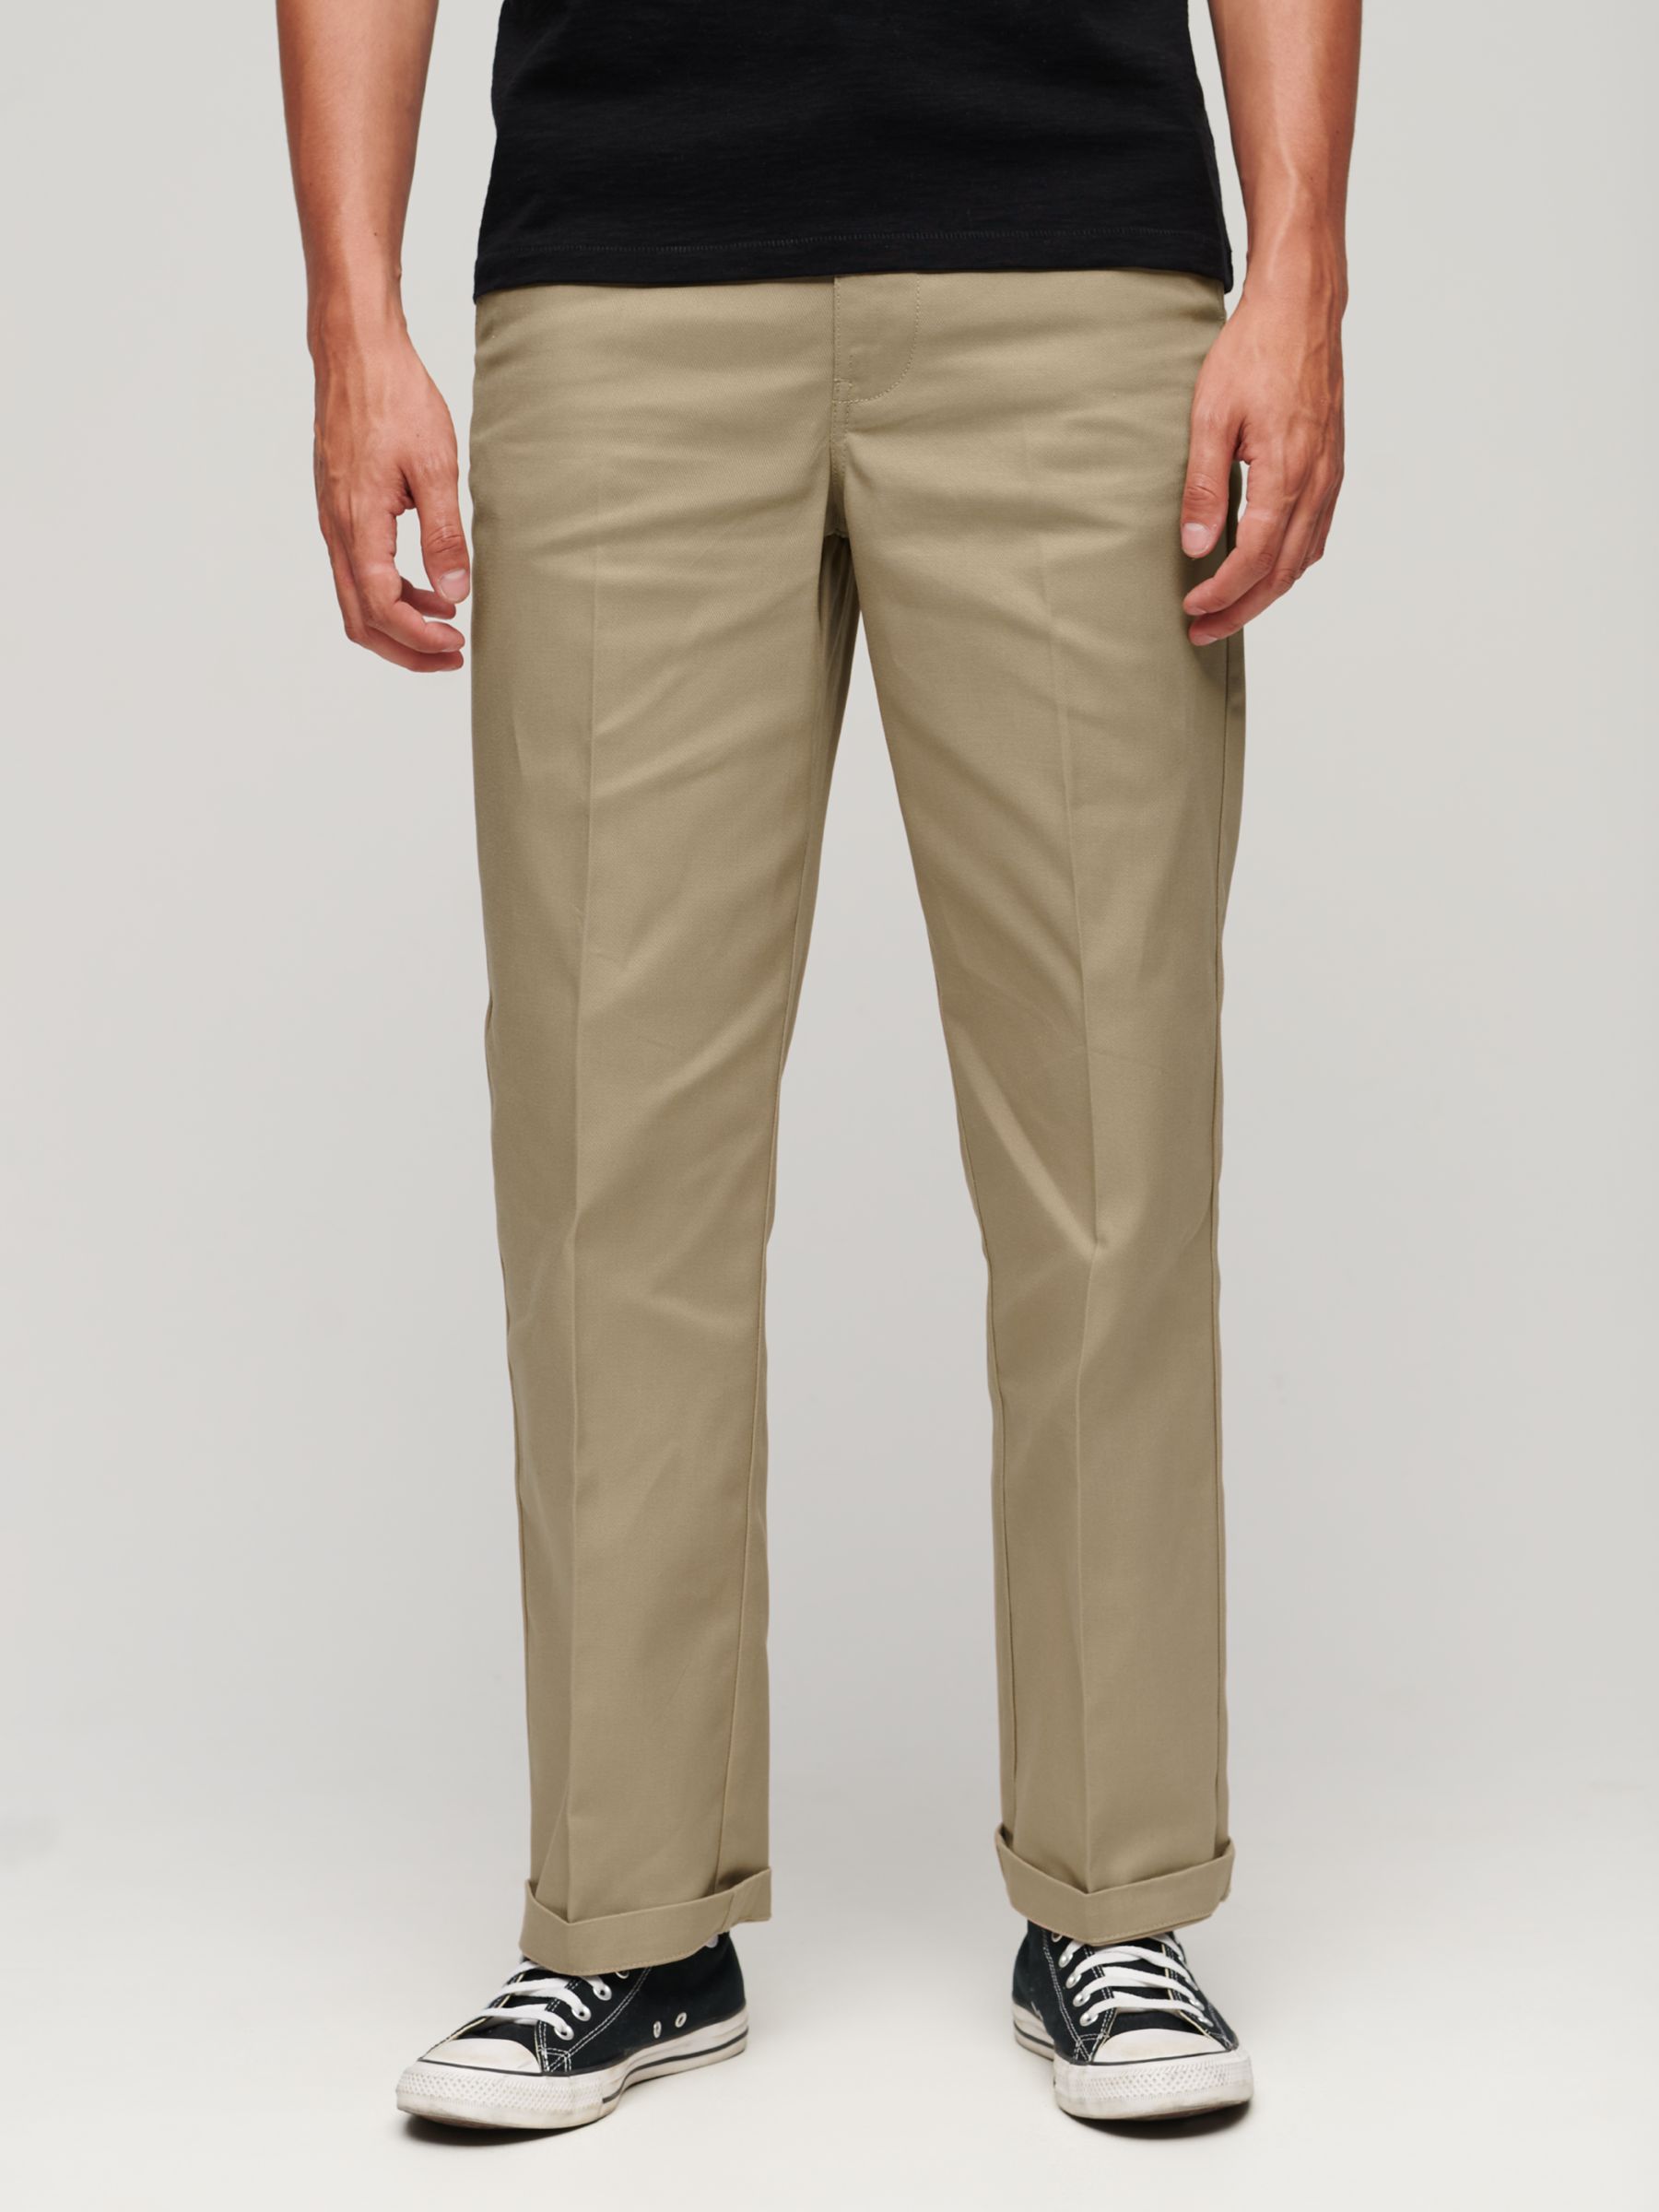 Superdry Straight Chinos, Taupe Brown, W28/L32